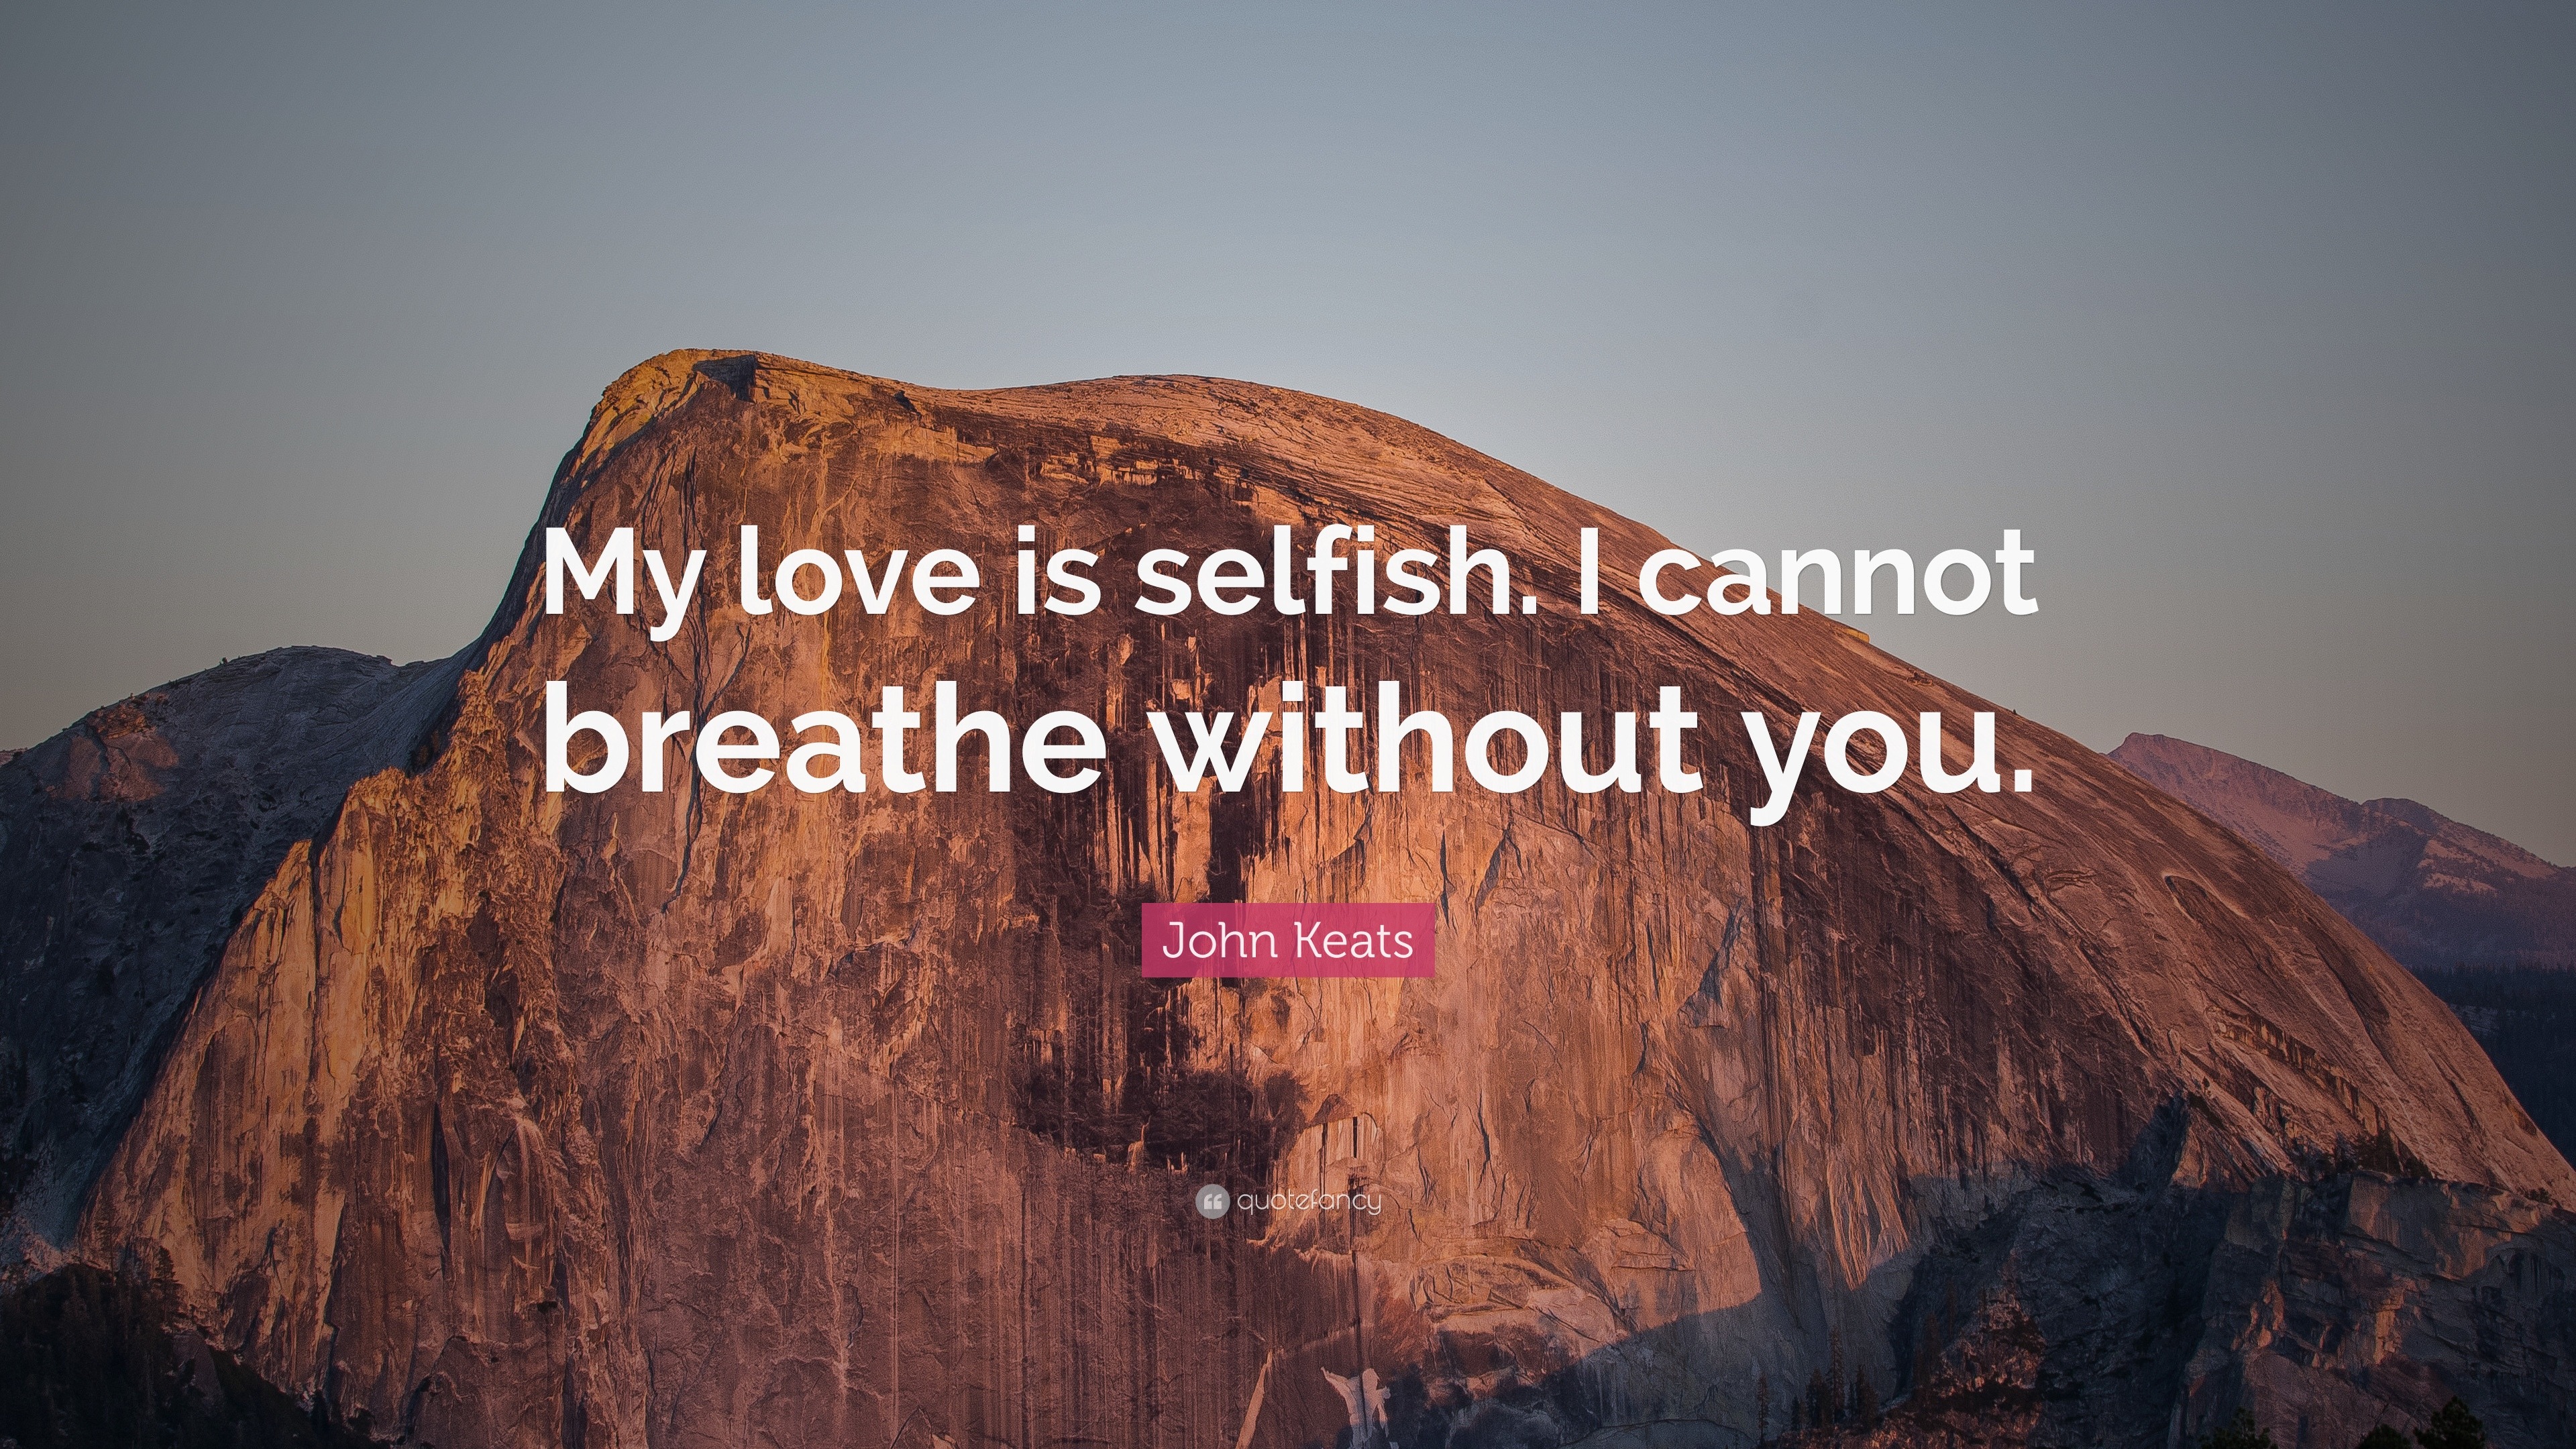 Selfish love meaning